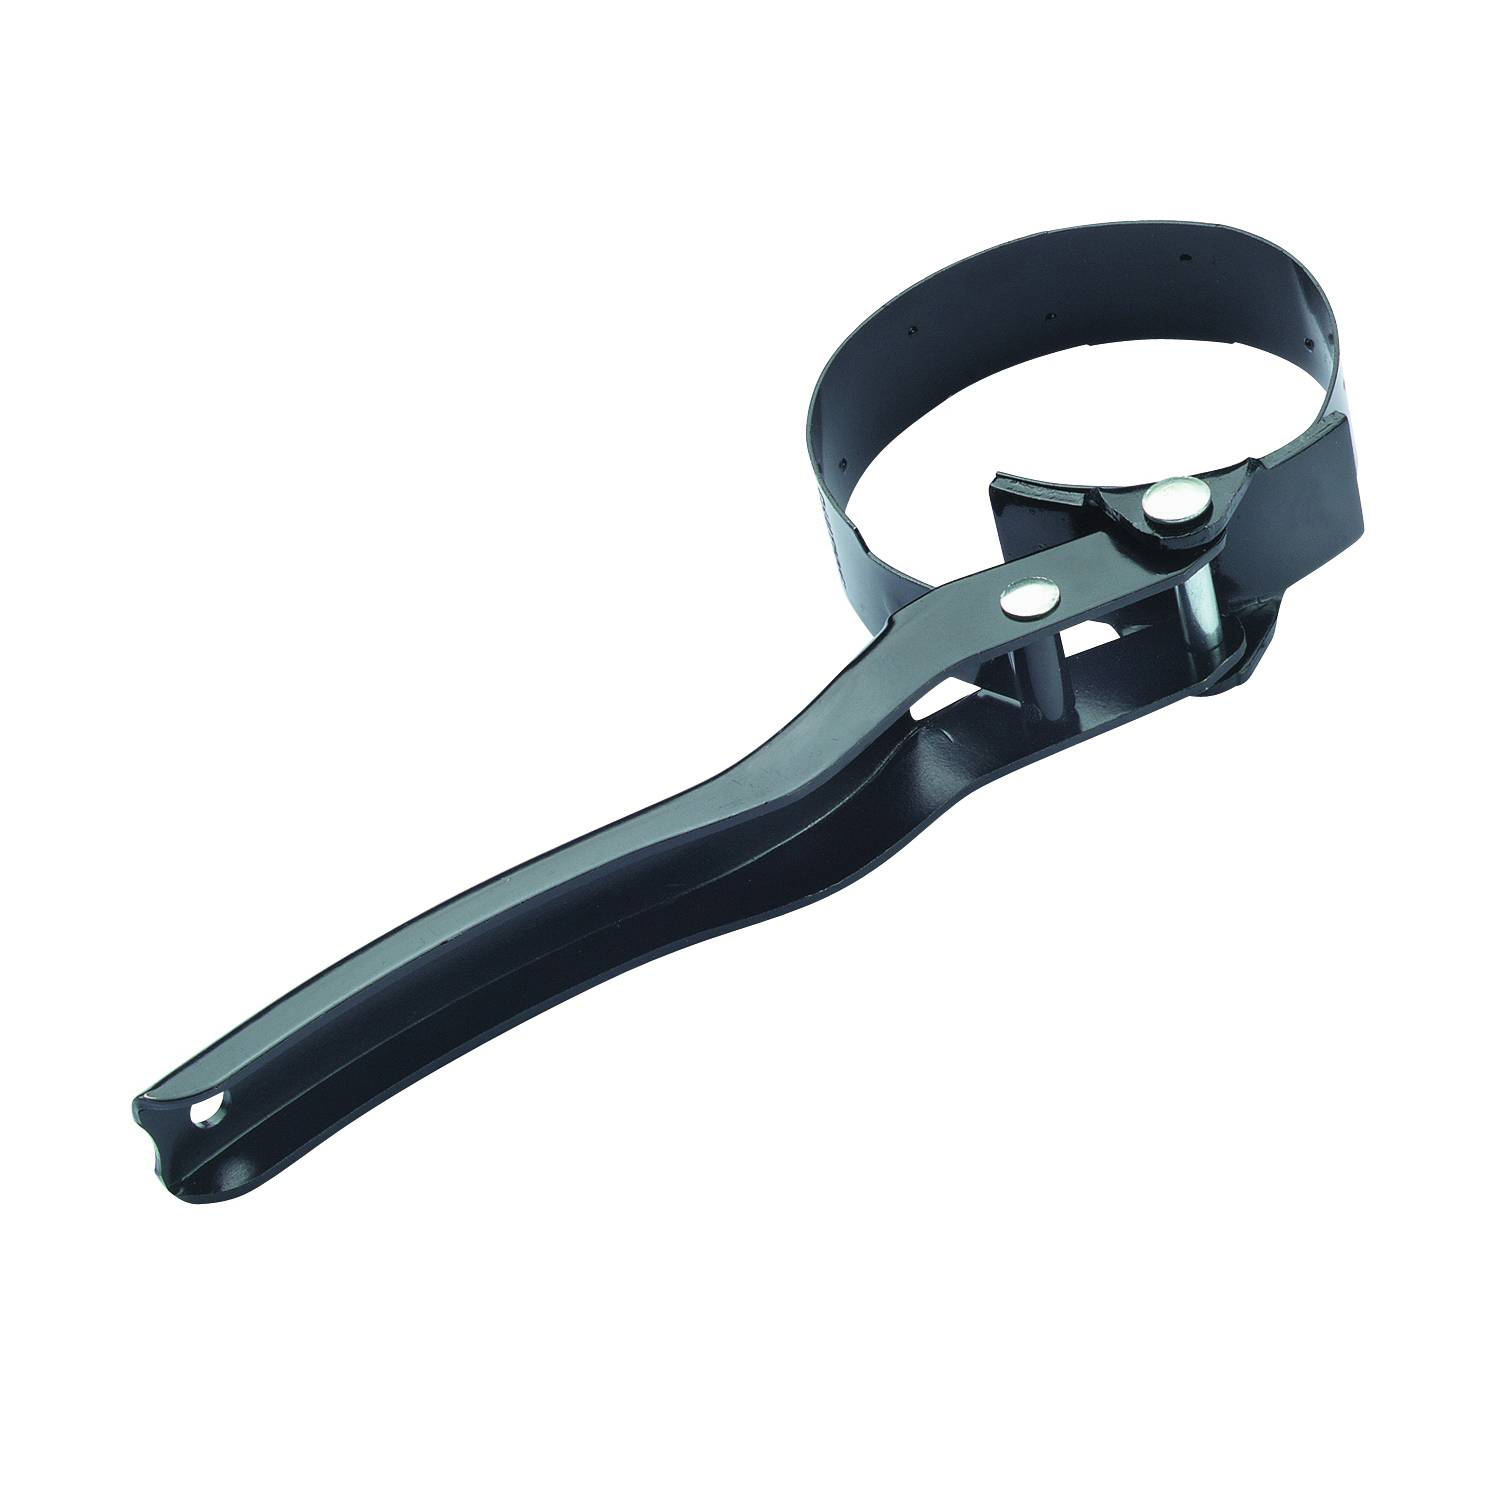 70-535 Oil Filter Wrench, S, Steel